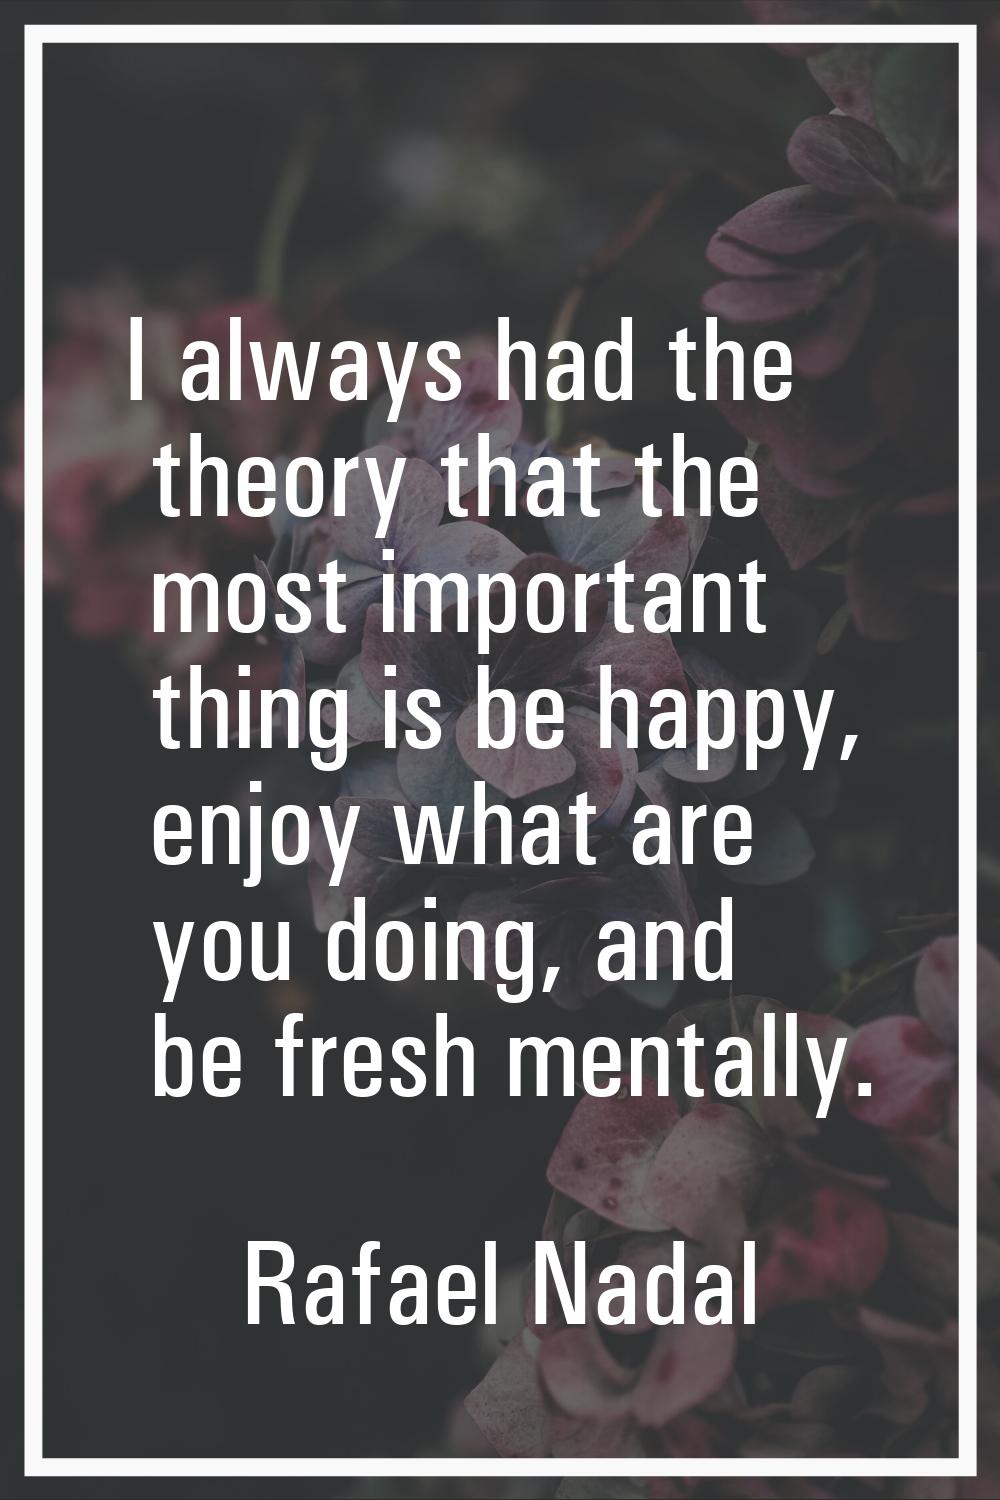 I always had the theory that the most important thing is be happy, enjoy what are you doing, and be